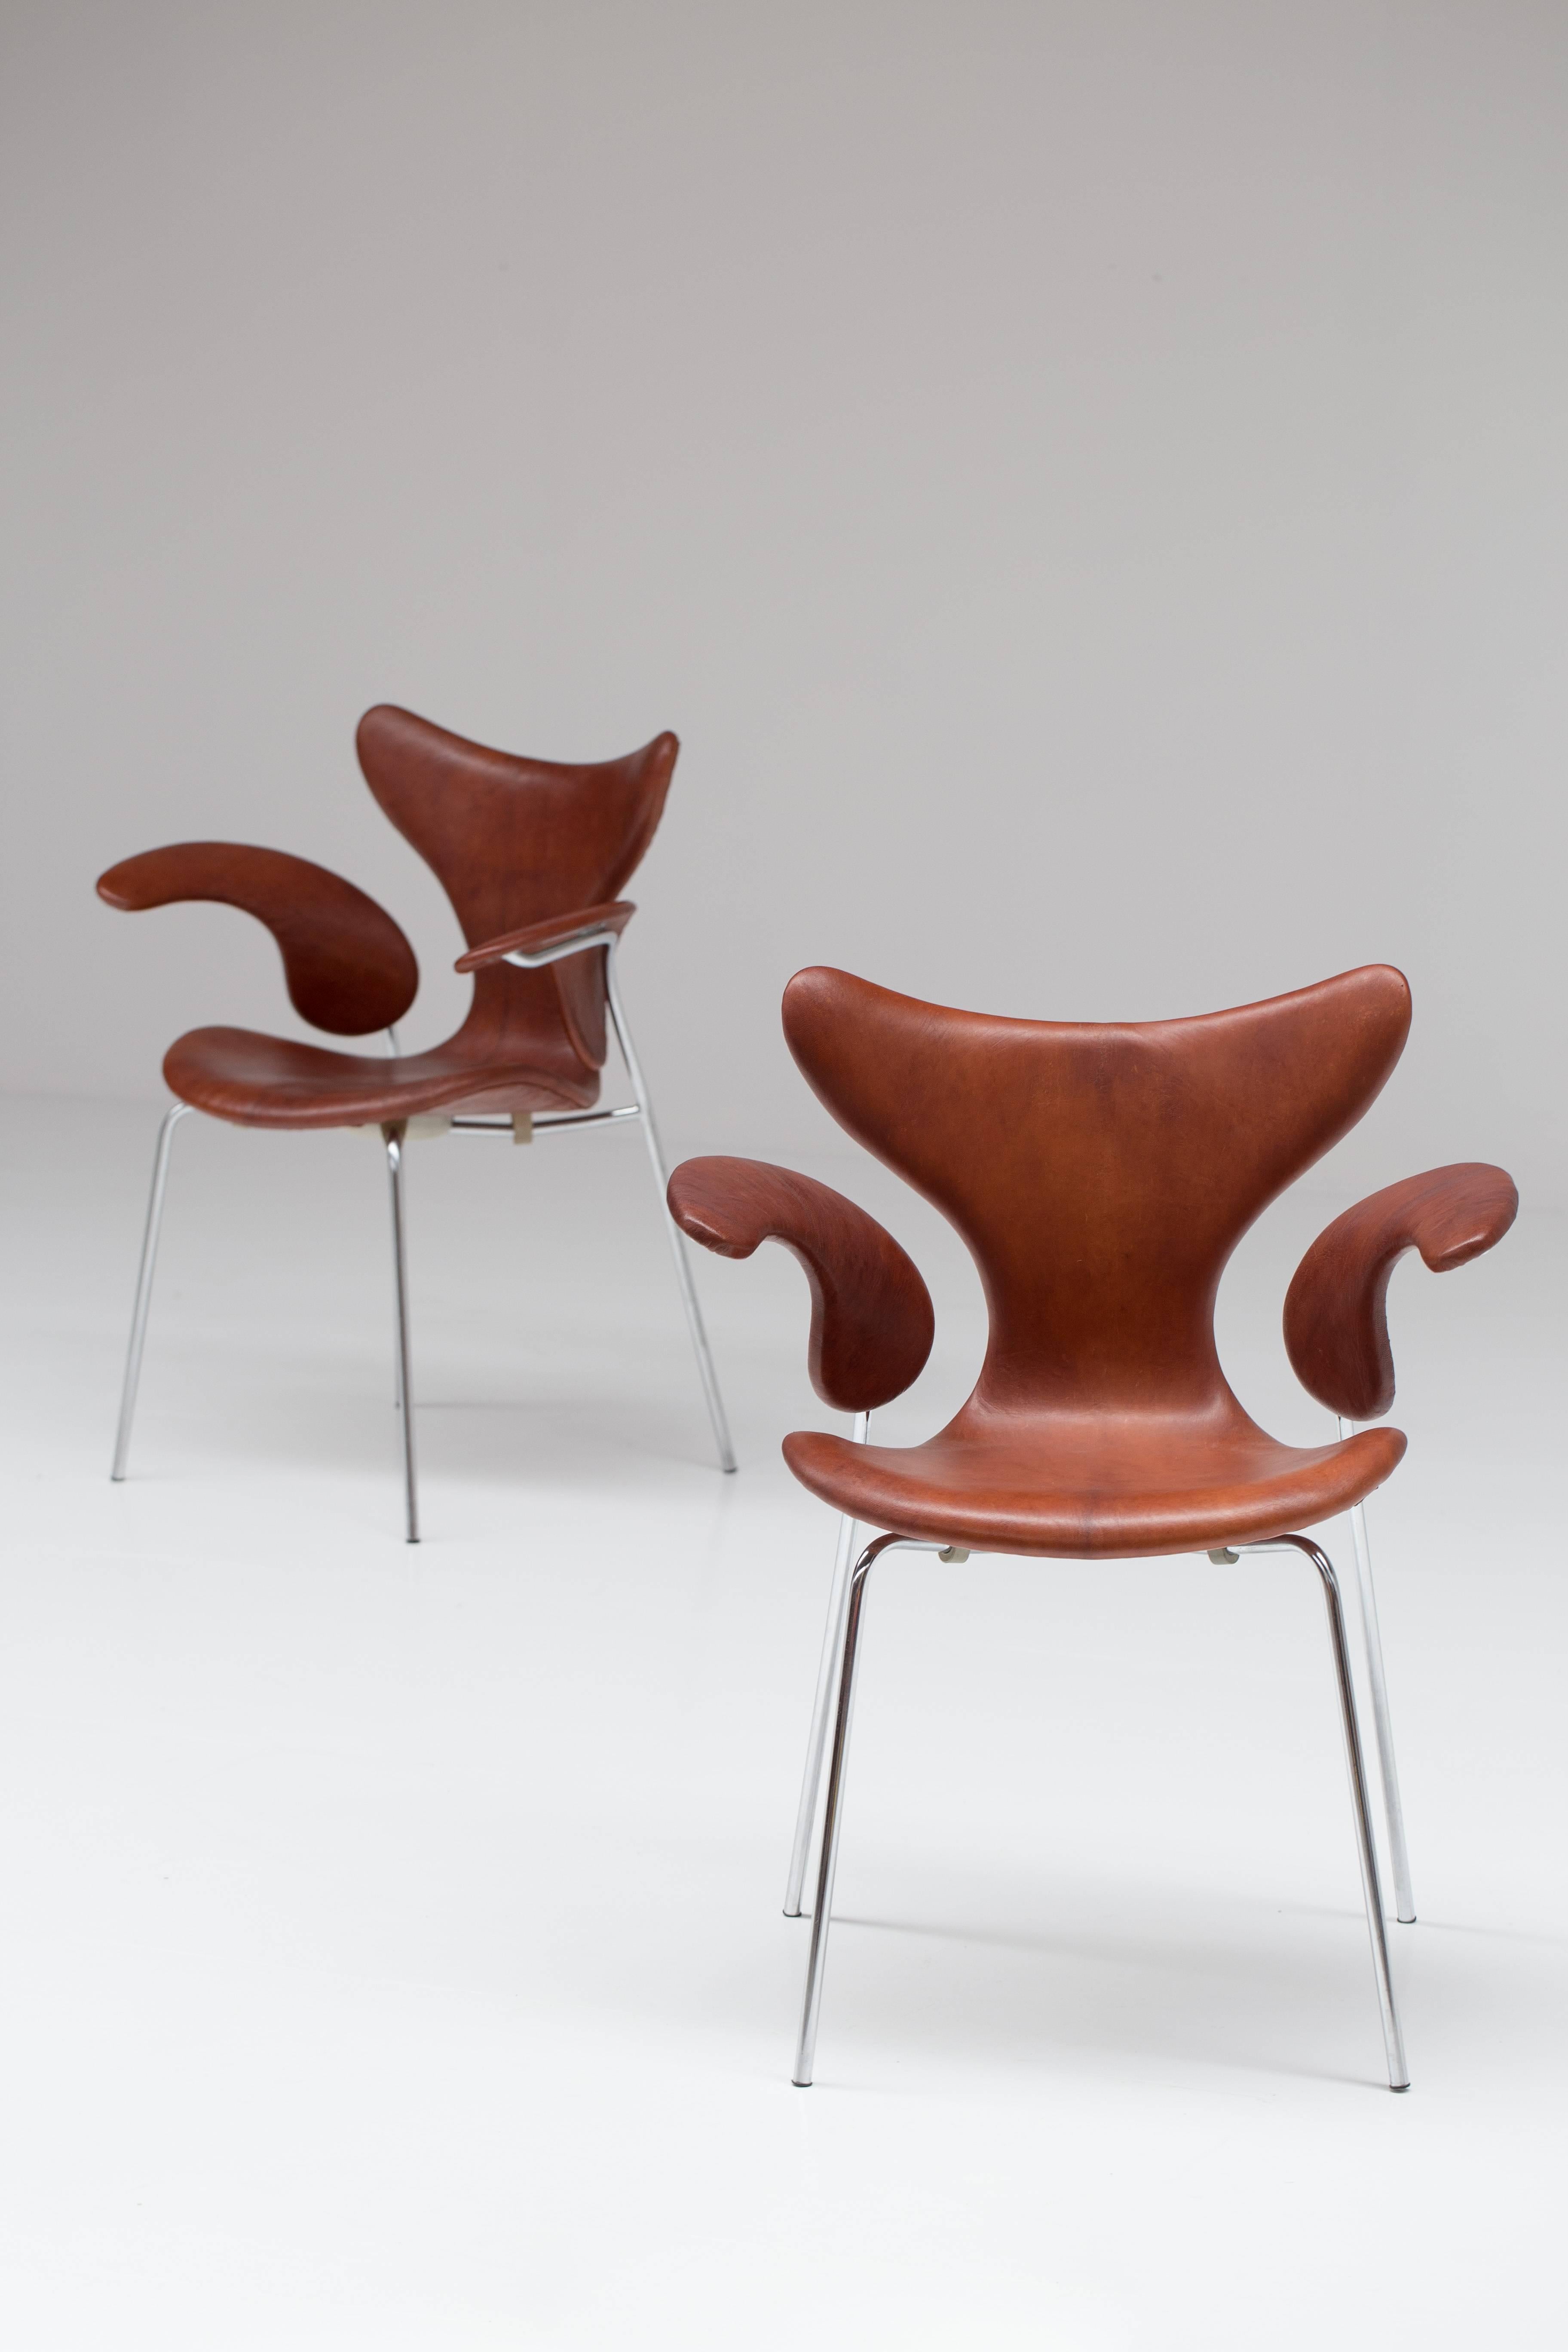 Pair of rare original leather Arne Jacobsen armchairs named and known as 'Seagull'. 
Manufactured by Fritz Hansen, marked '1970'. The leather is just fantastic.